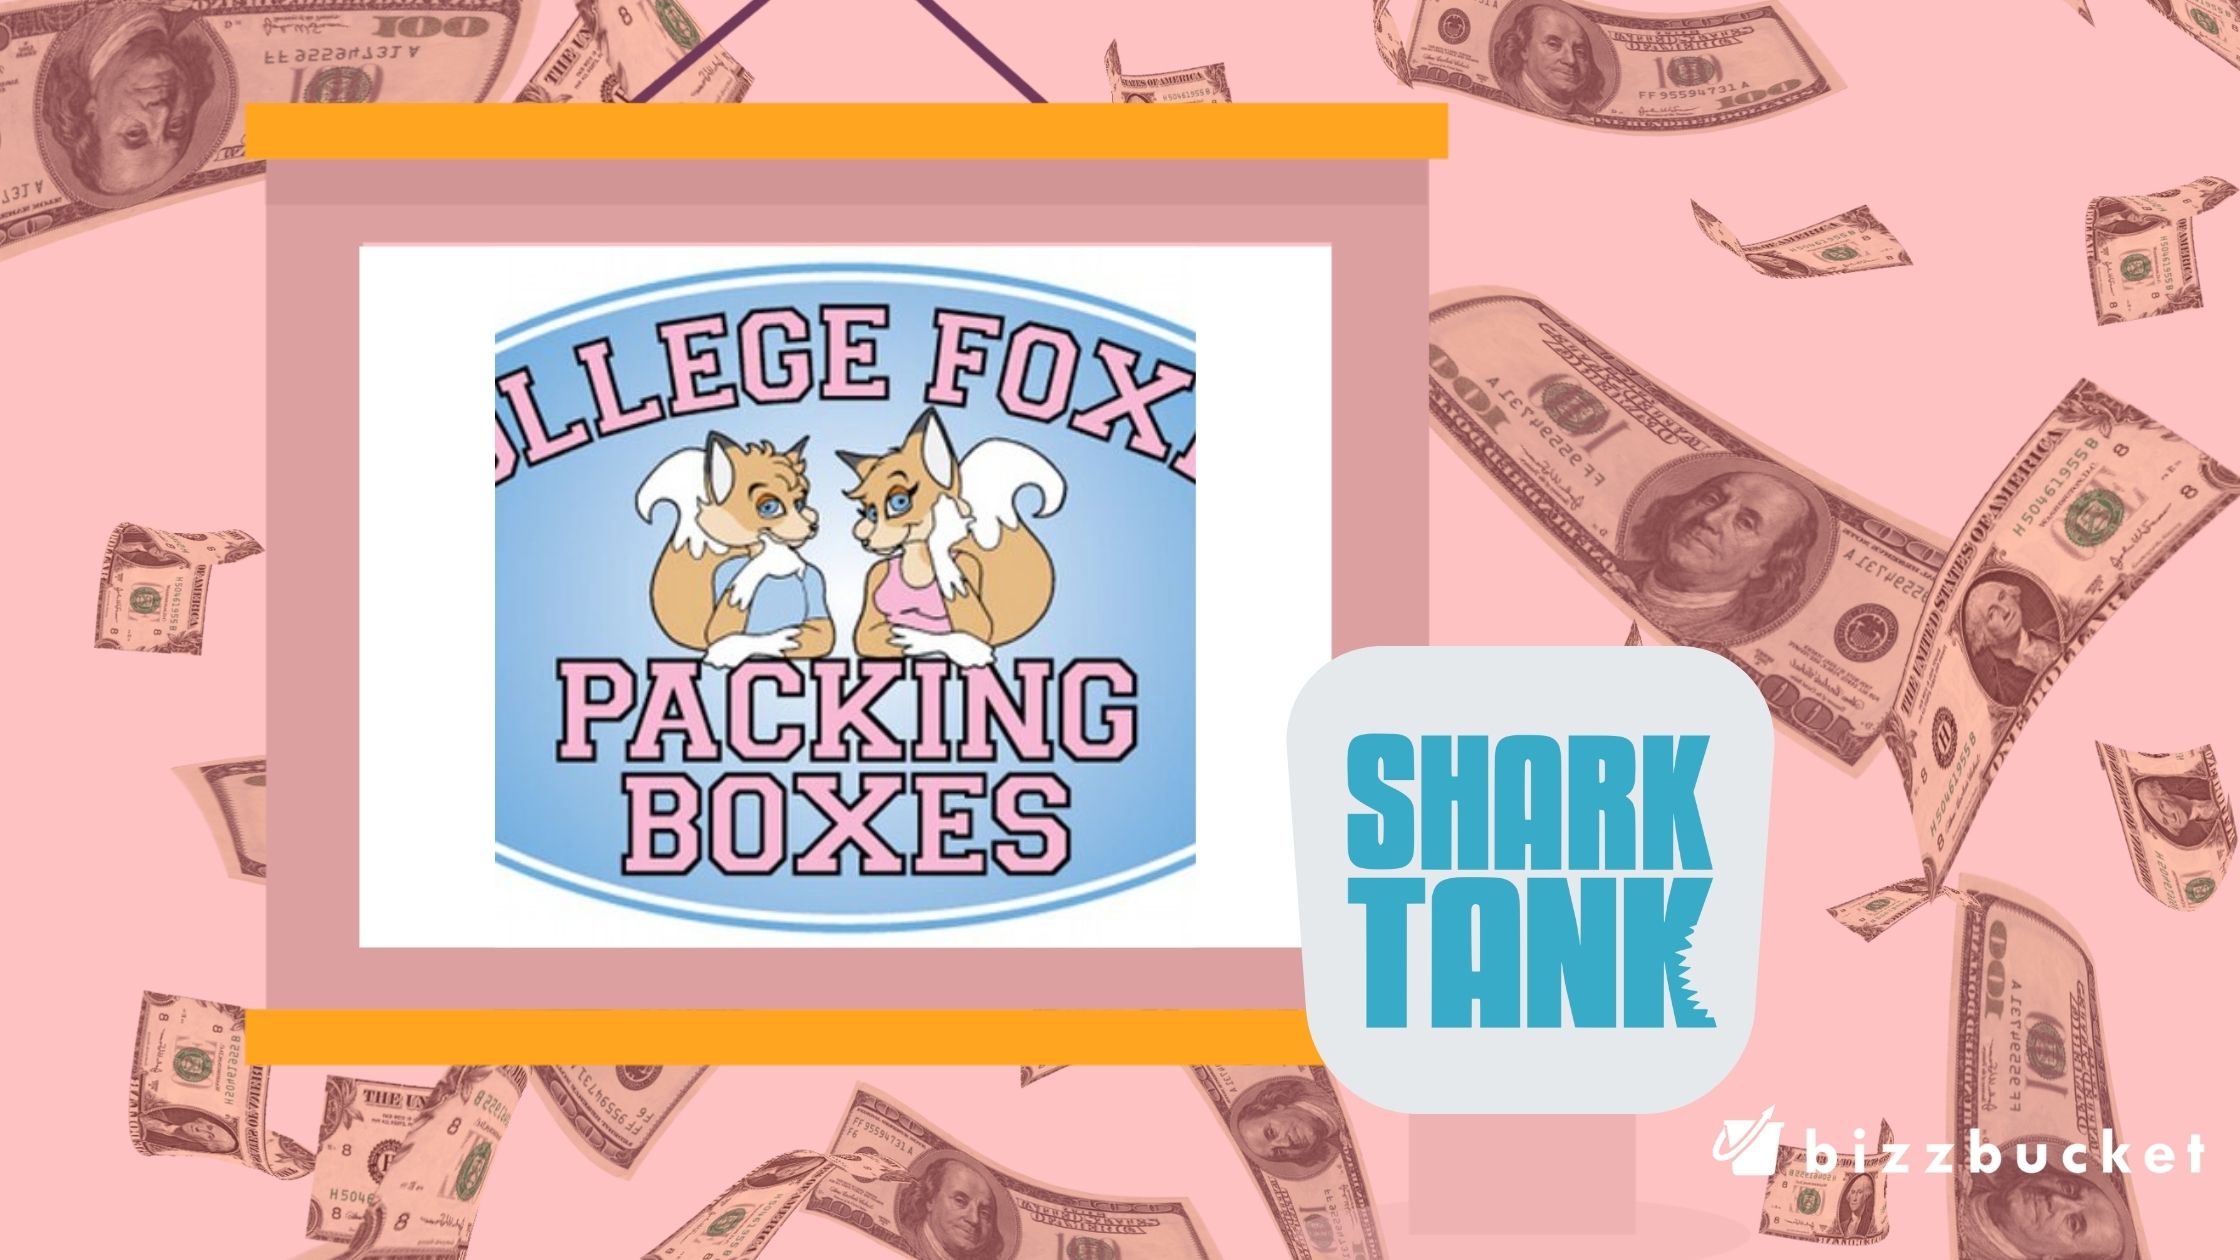 College Foxes Packaging Boxes shark tank update